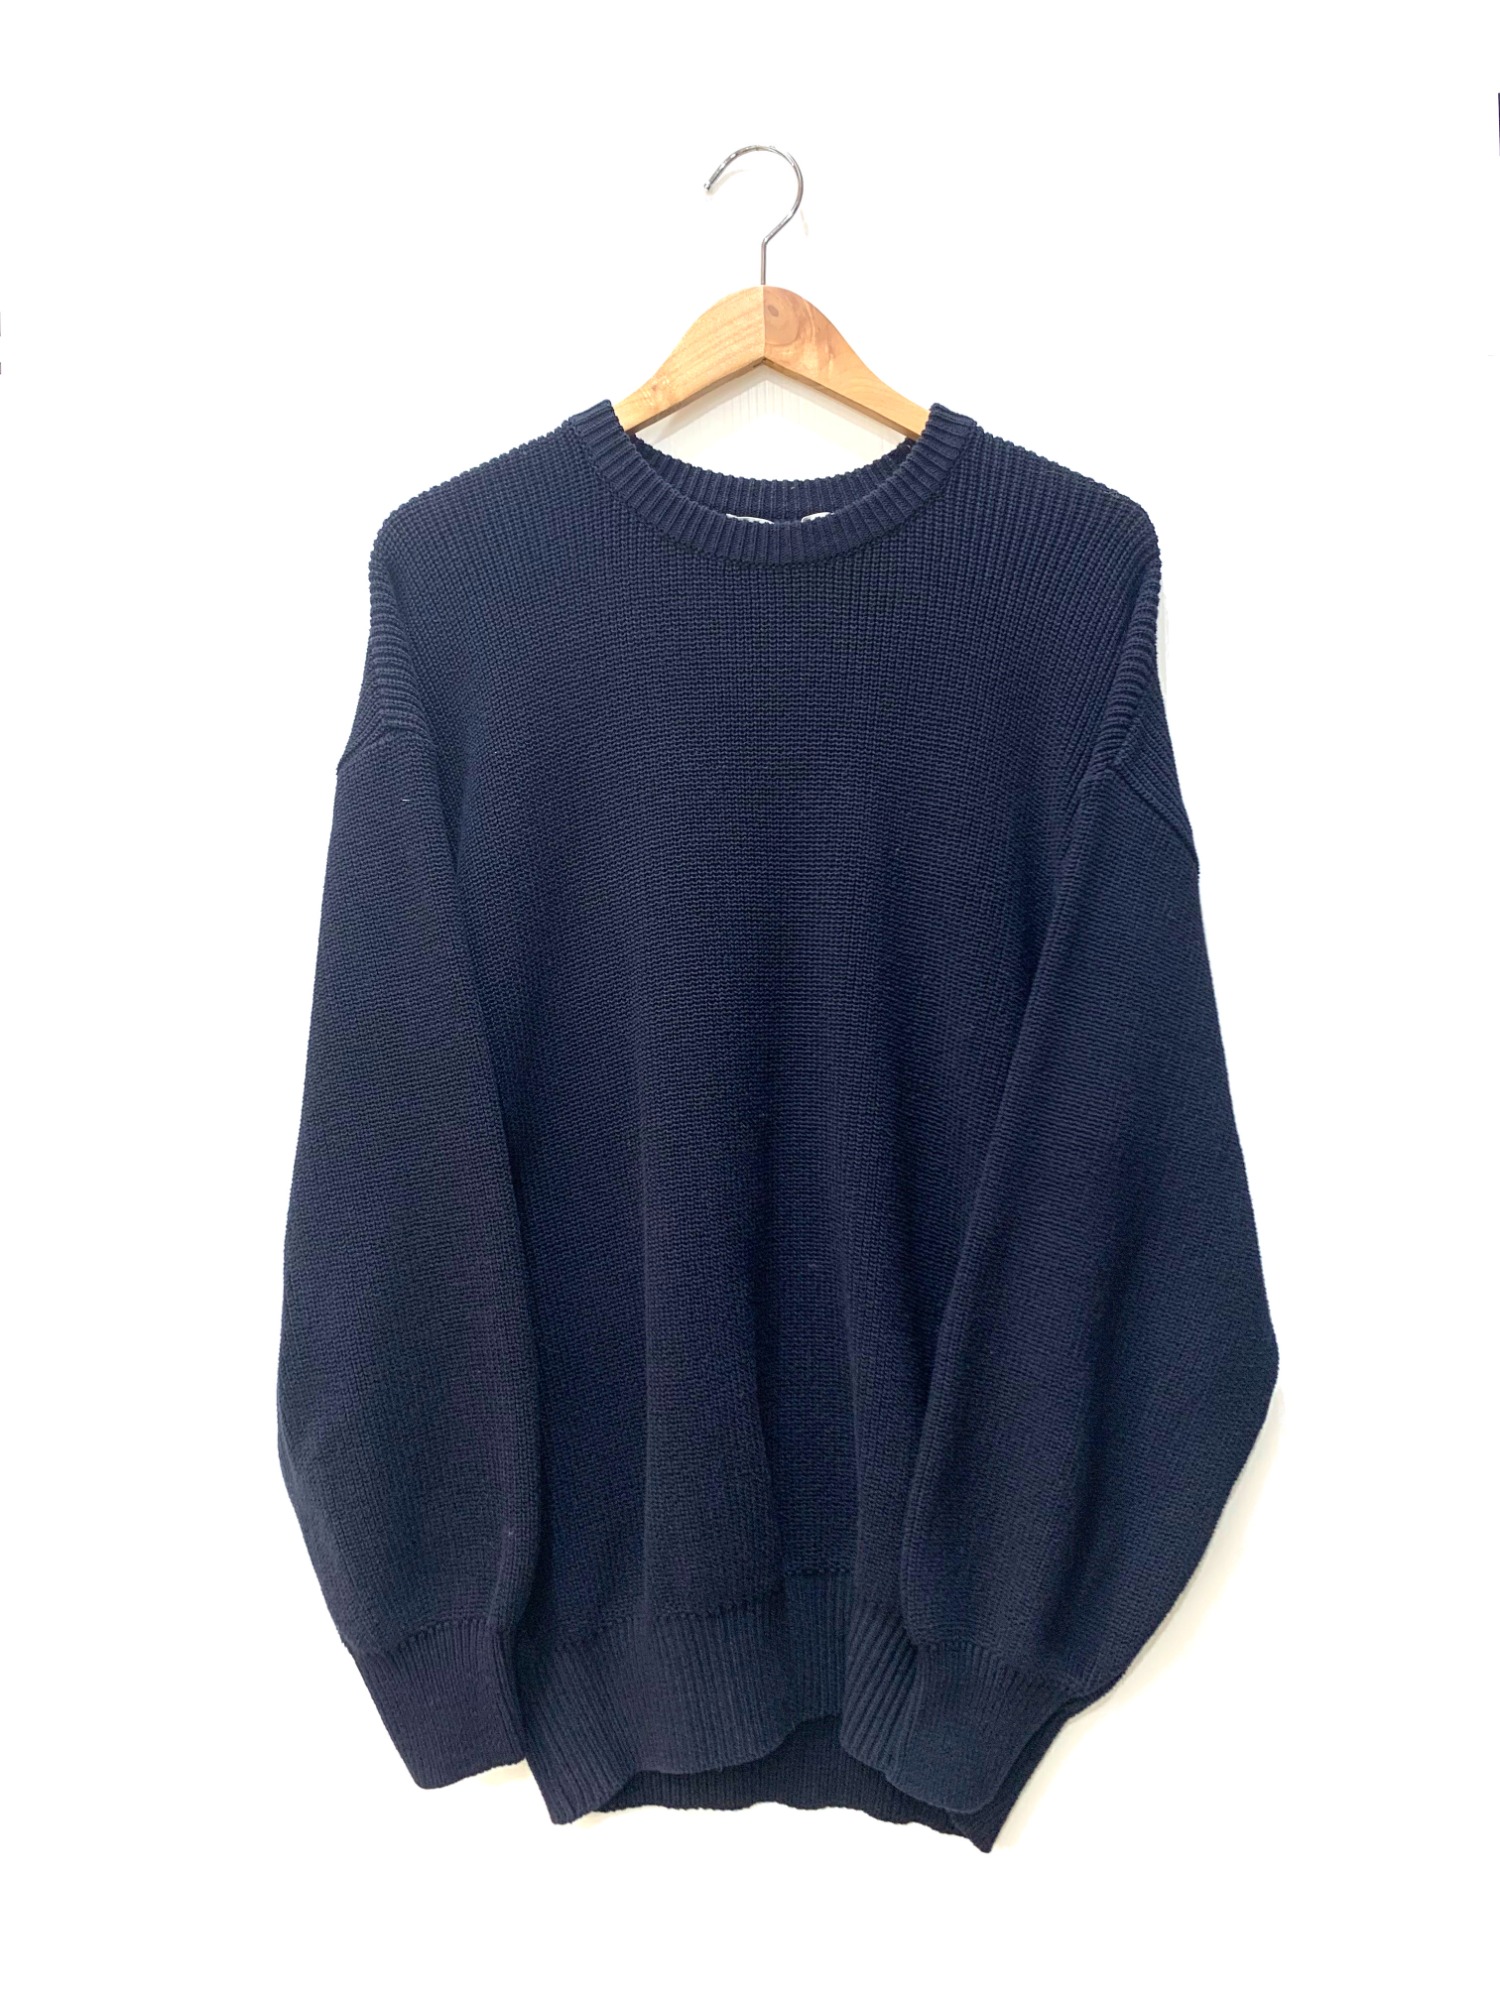 COMME des GARCONS HOMME】80'sアーカイブニットアイテム買取入荷